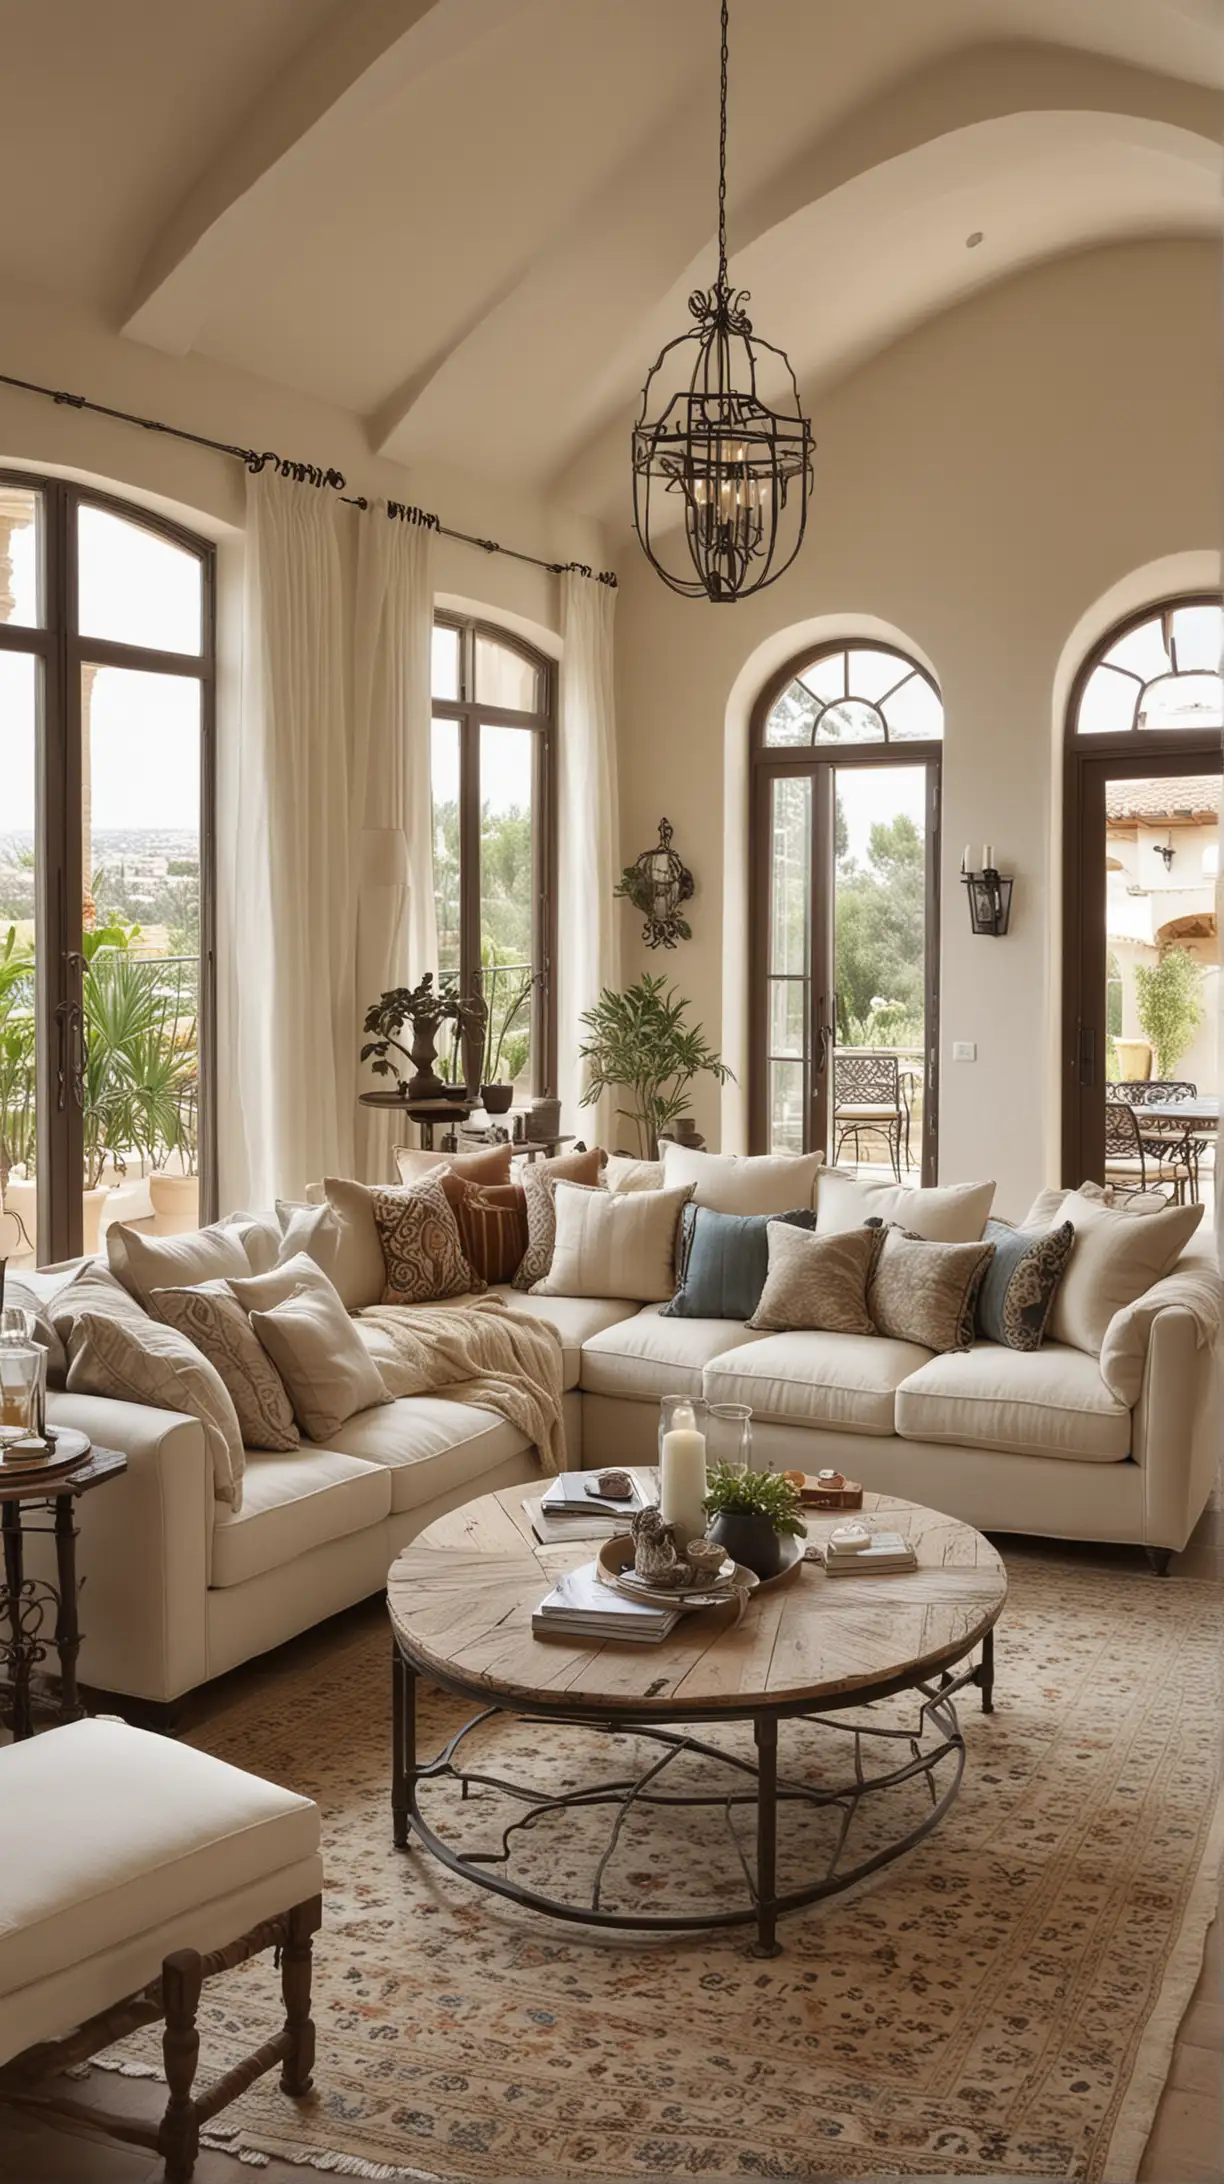 Mediterranean Living Room with Layered Pillows on Couches